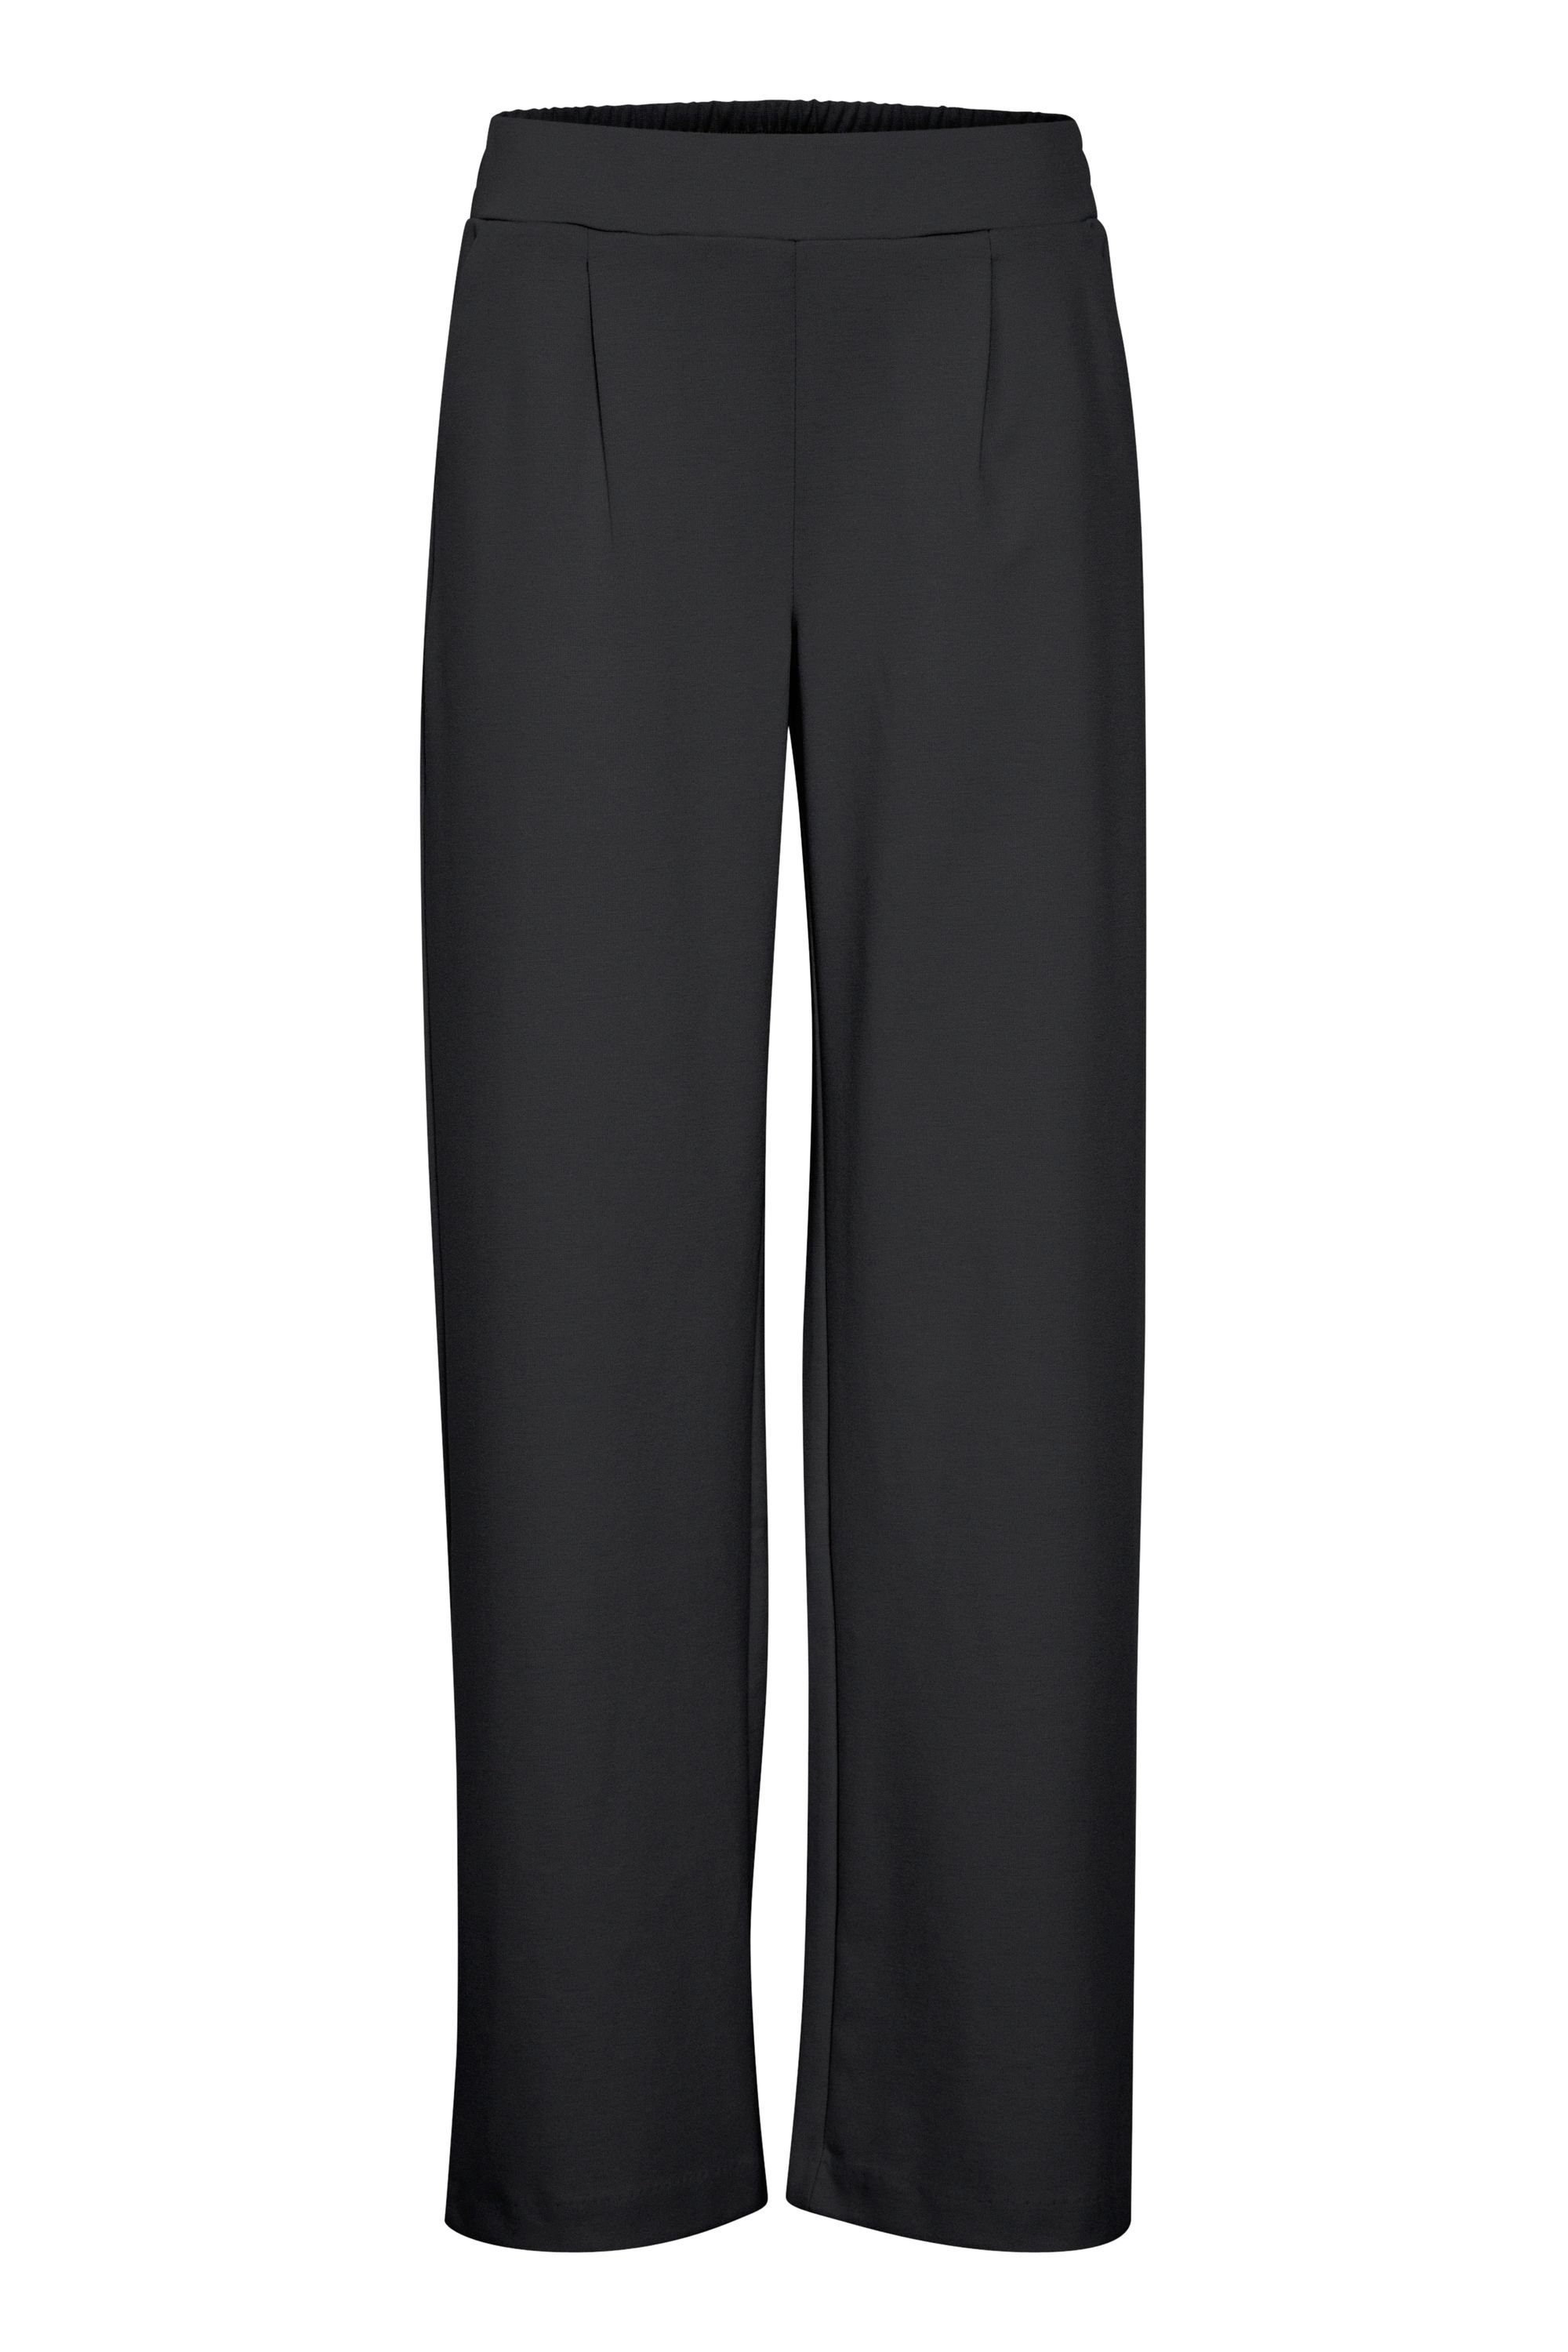 (200451) Stoffhose 20812847 BYRIZETTA 2 Black WIDE 2 - b.young PANTS